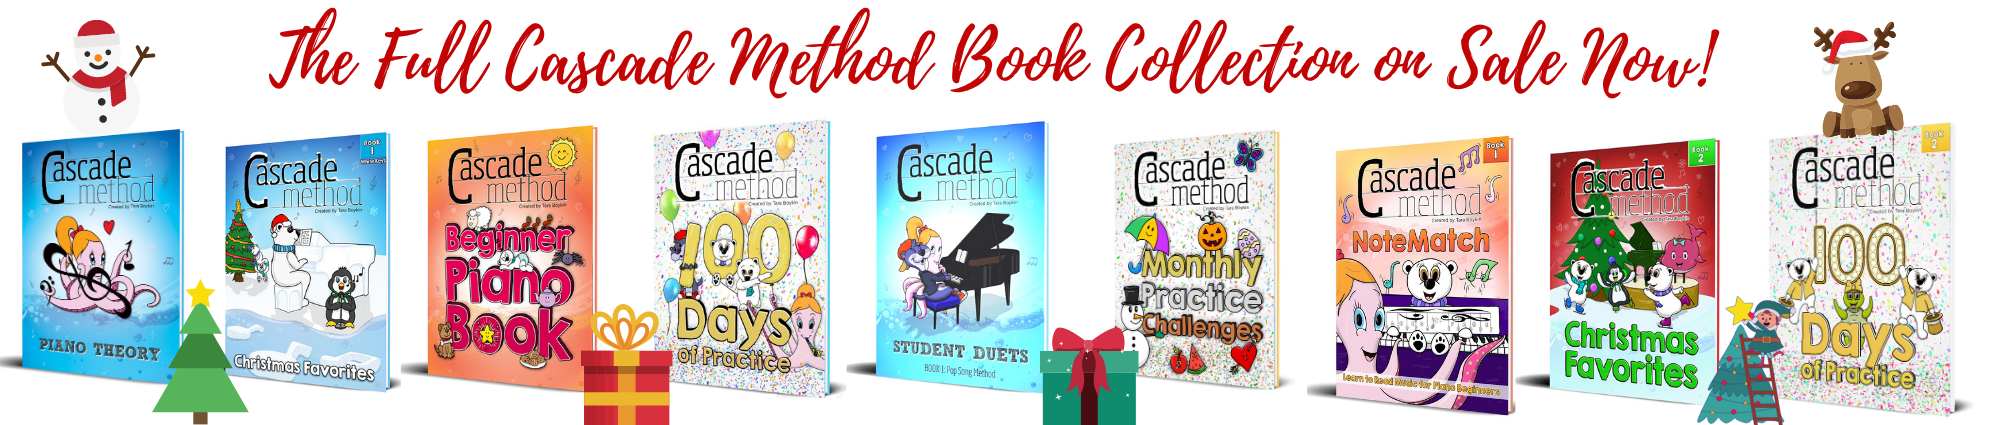 Cascade Method Book Collection Full Sale